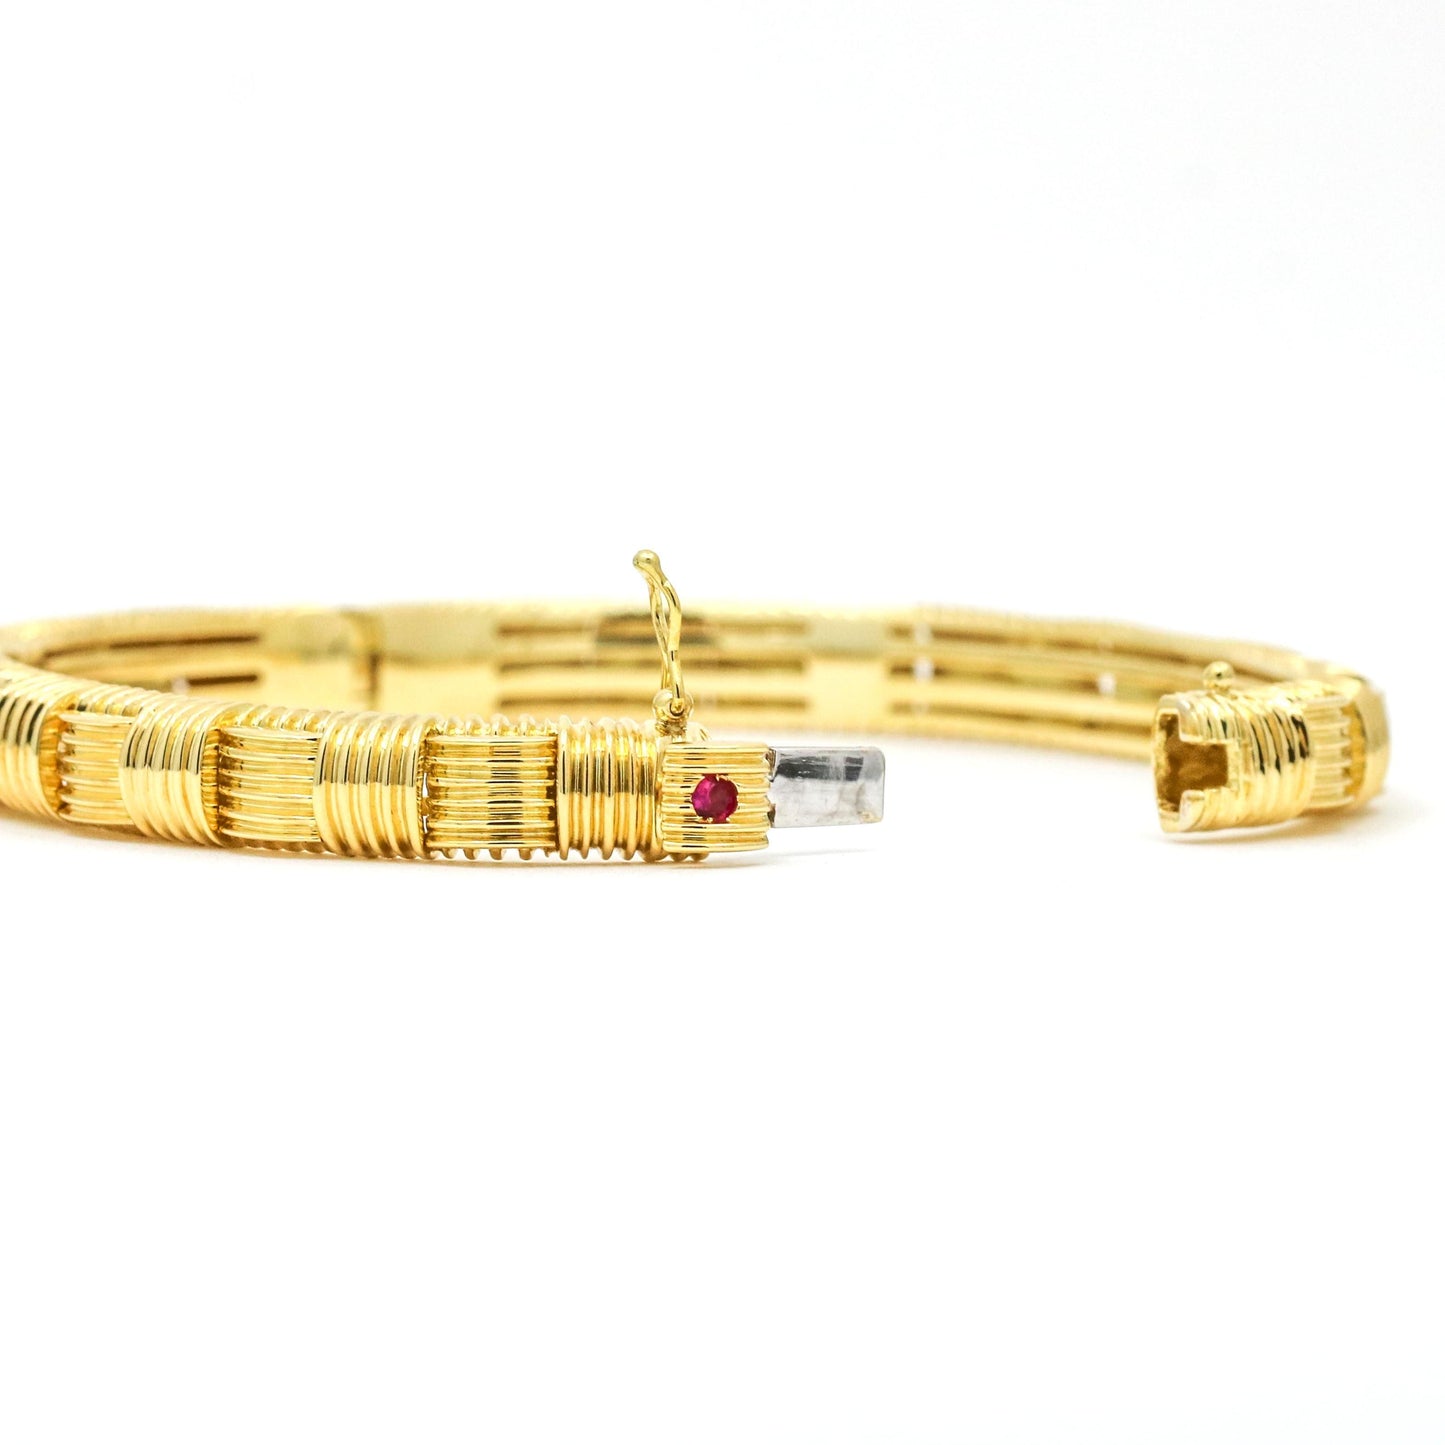 Roberto Coin Appassionata Hinged Bangle Bracelet in 18k Yellow Gold - 31 Jewels Inc.